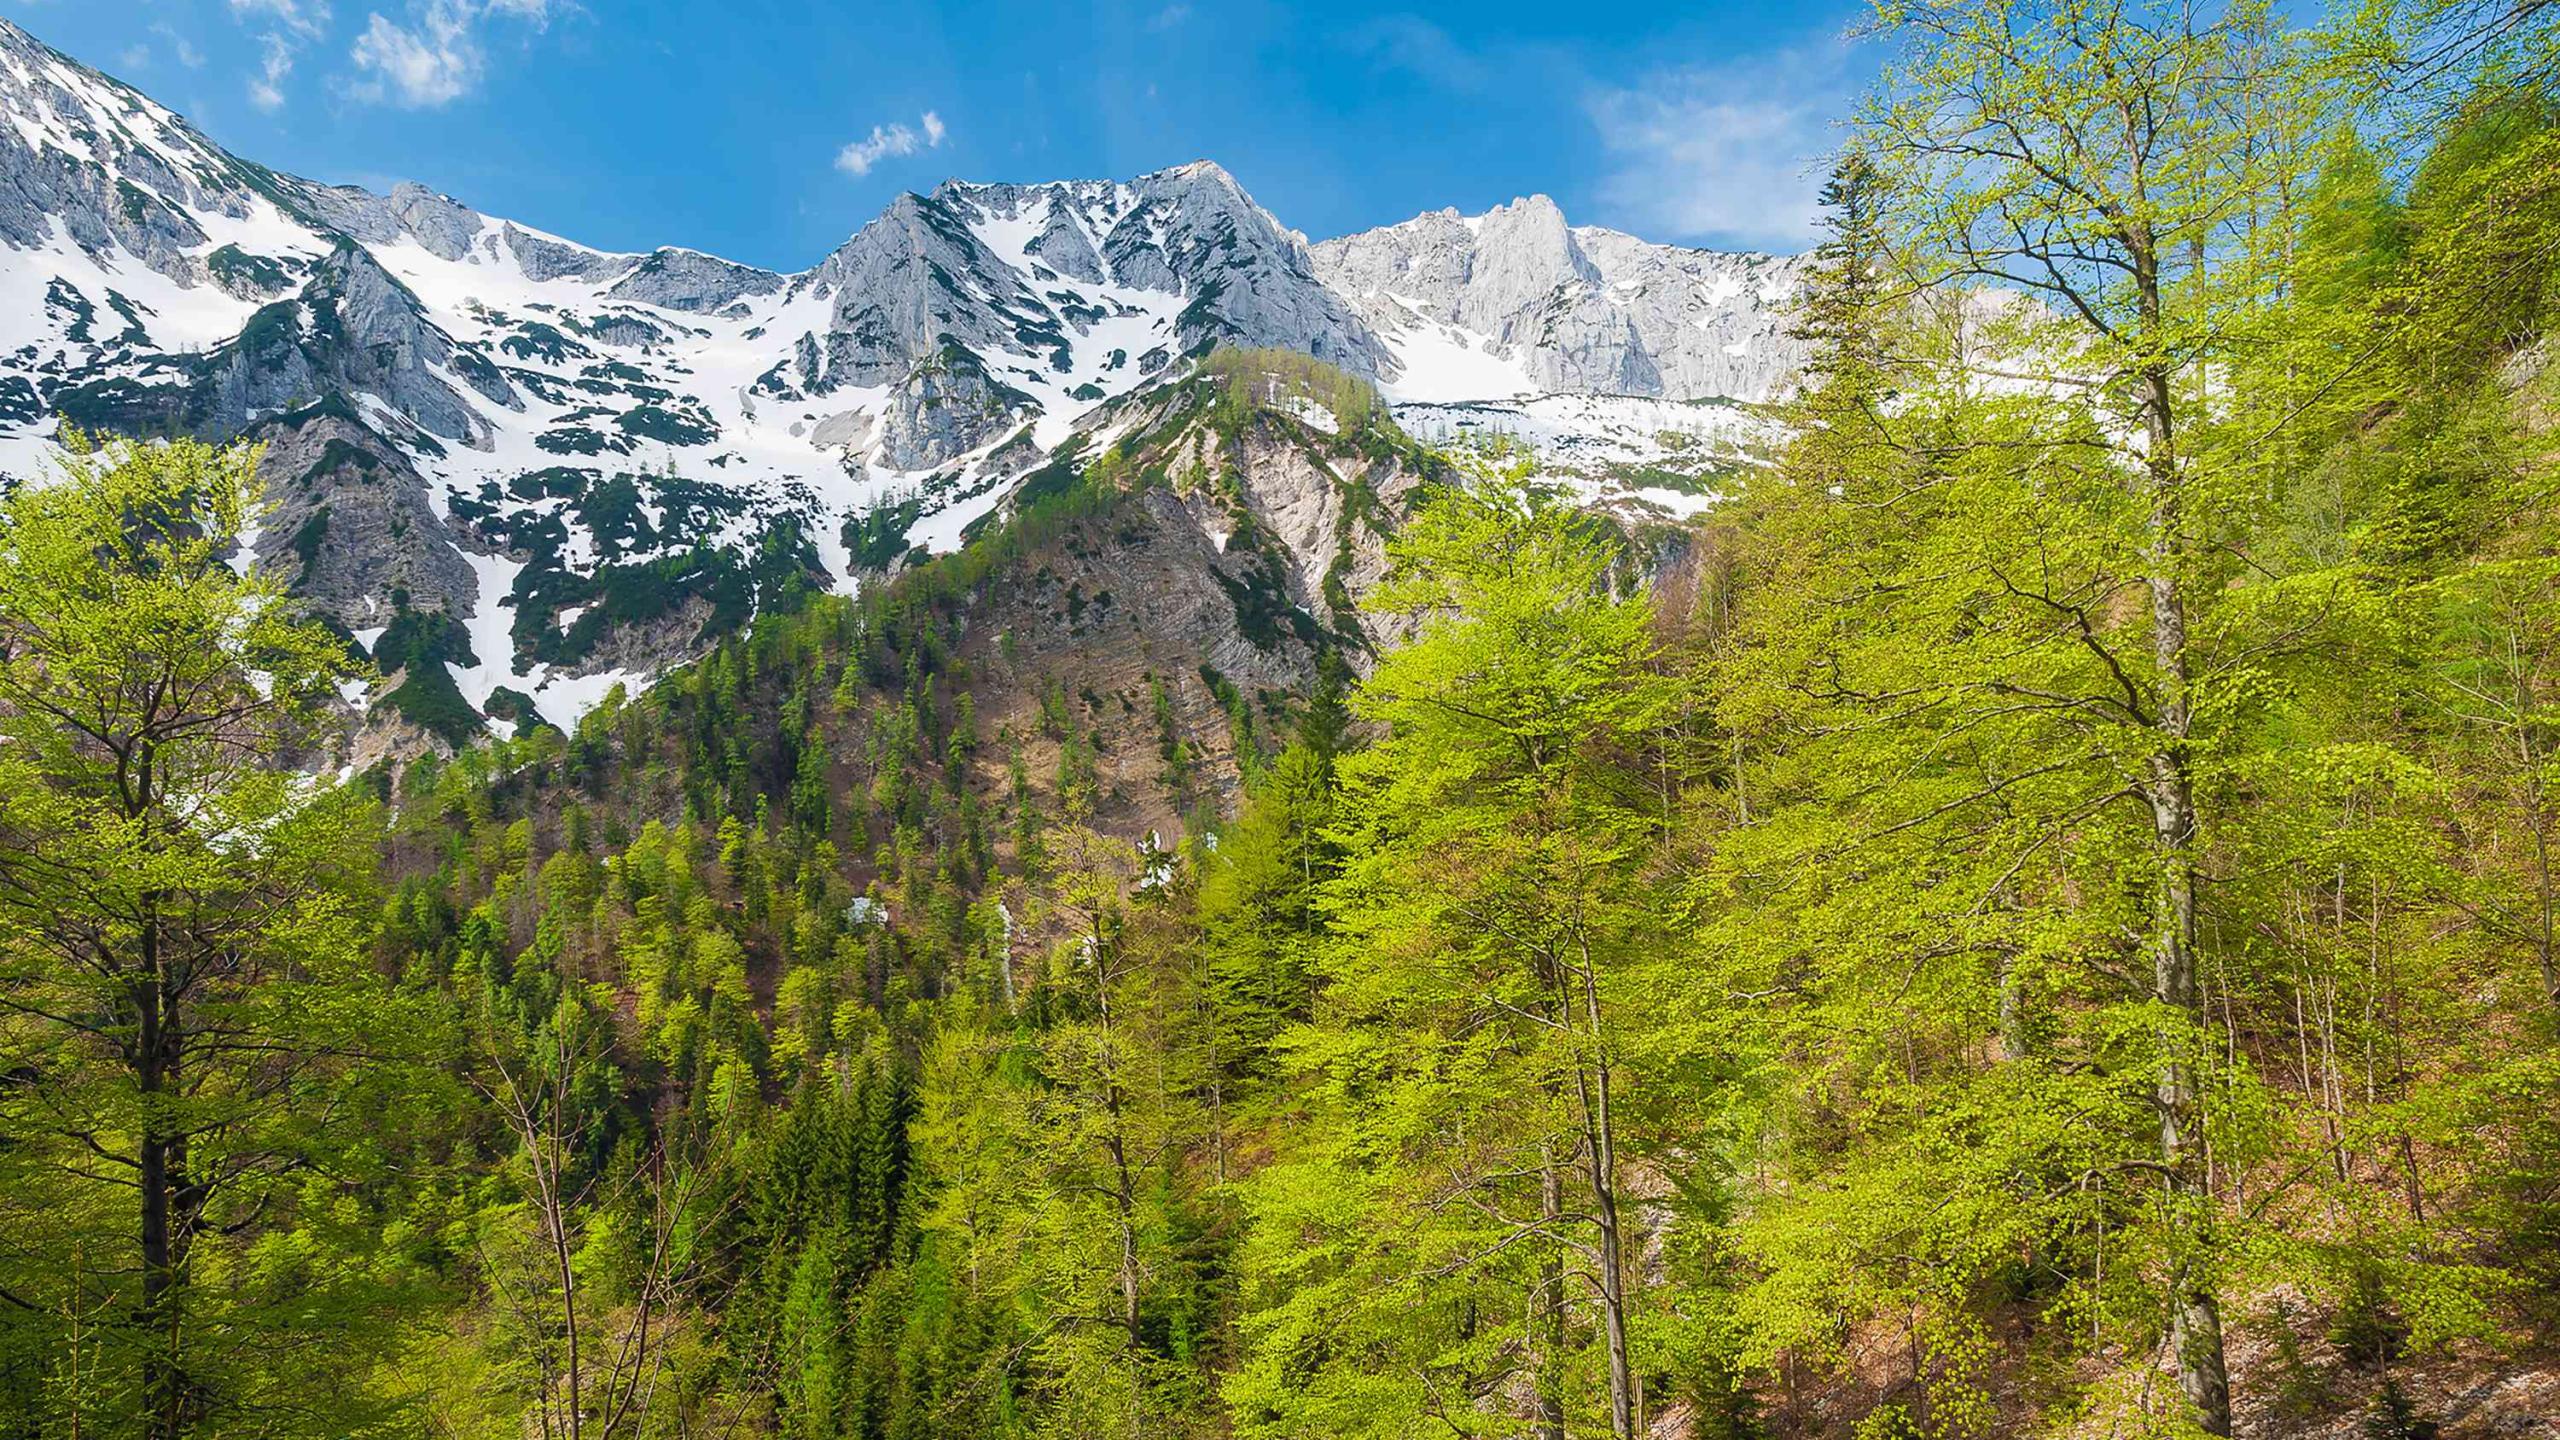 Spring-green beech trees glow in the sunlight in front of the still snow-covered rocky northern precipices of the Sengsen Mountains